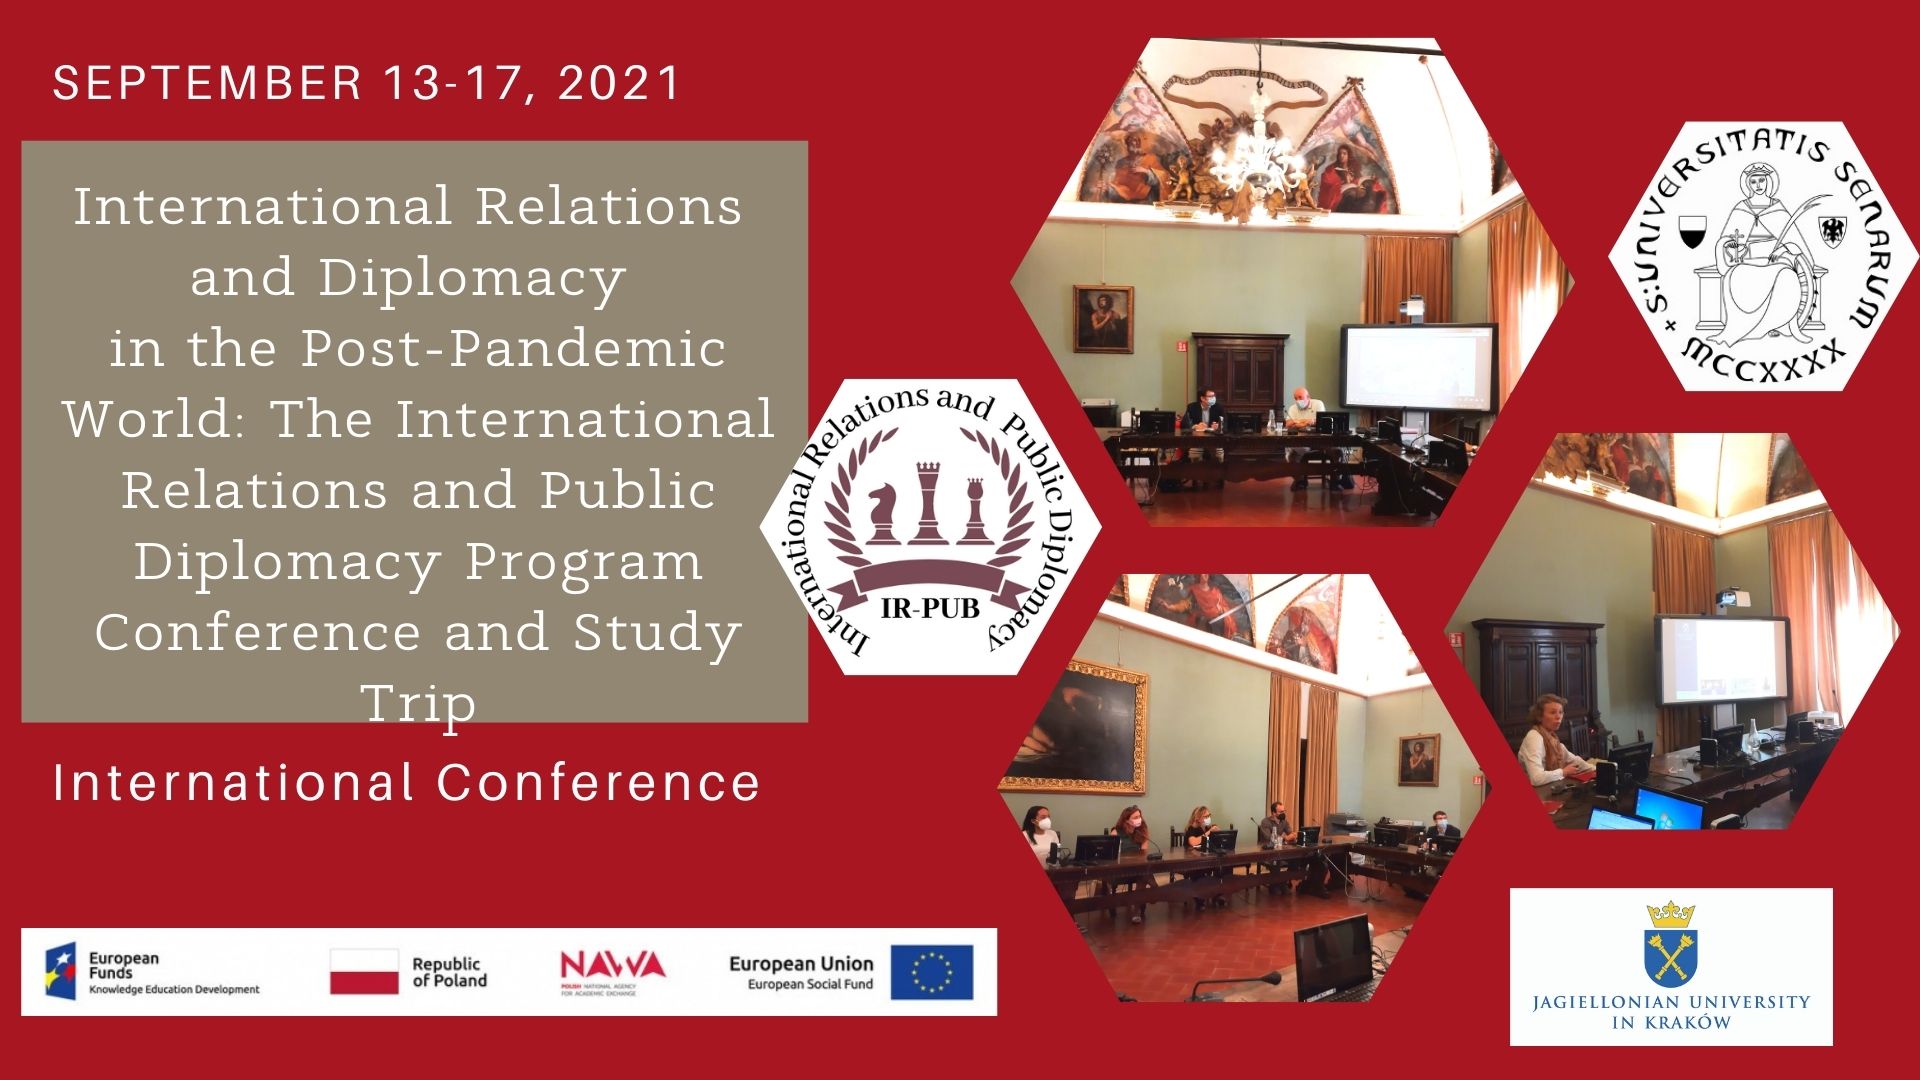 International Relations and Diplomacy in the Post-Pandemic World: The International Relations and Public Diplomacy Program Conference and Study Trip. The graphic shows graphics of the University of Siena and the International Relations and Public Diplomacy study program.